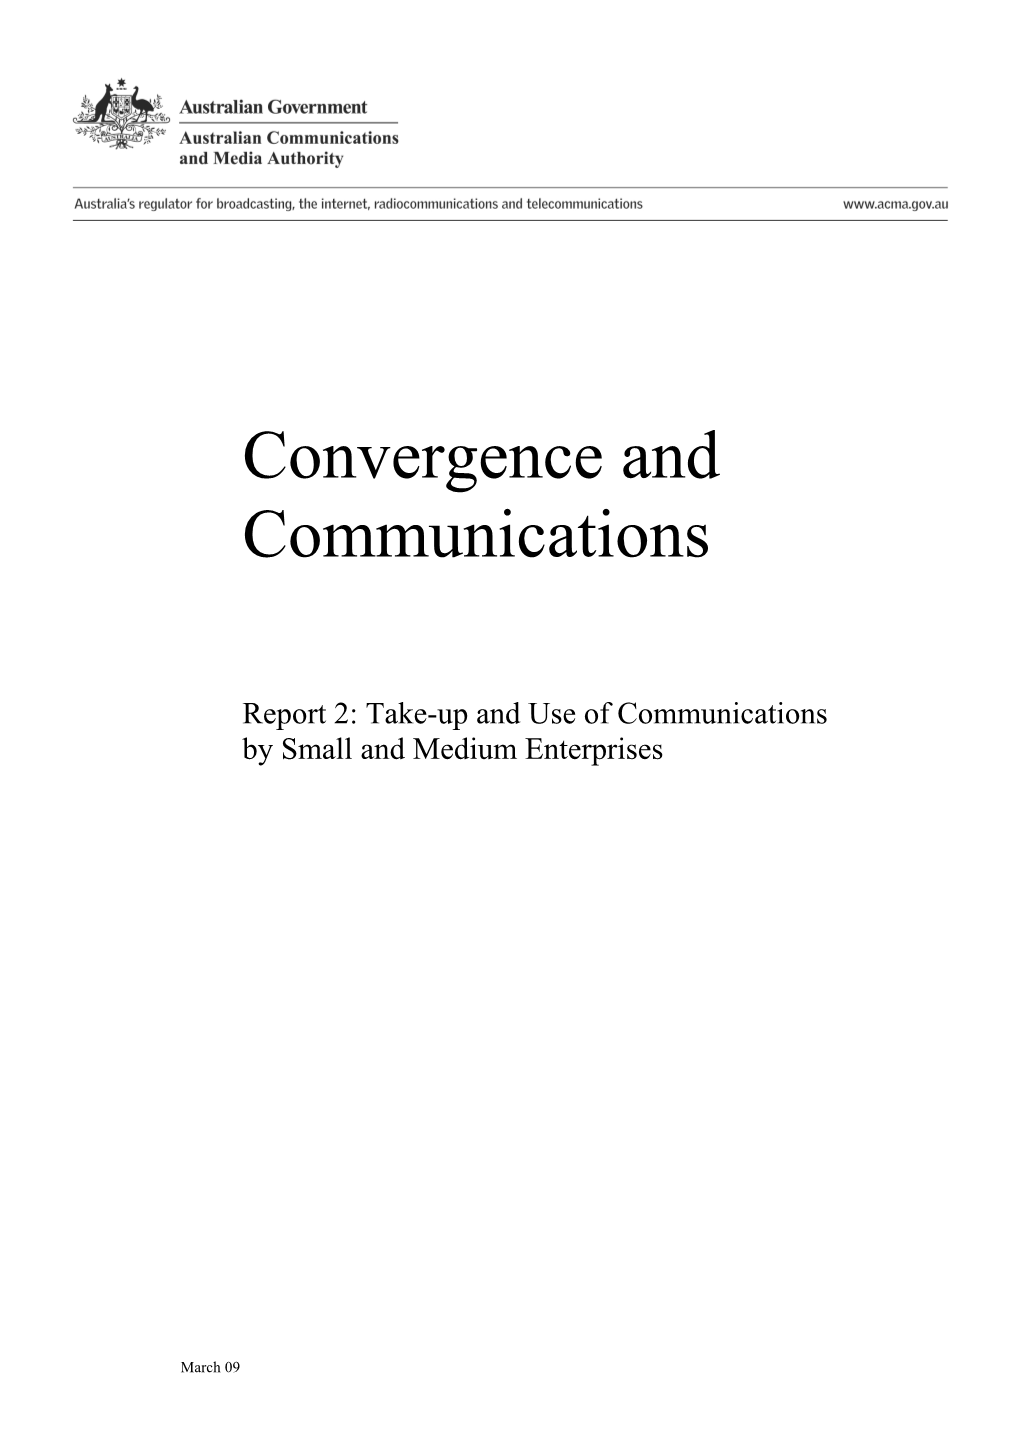 Convergence & Communications: Report 2: Take-Up and Use of Communications by Small And